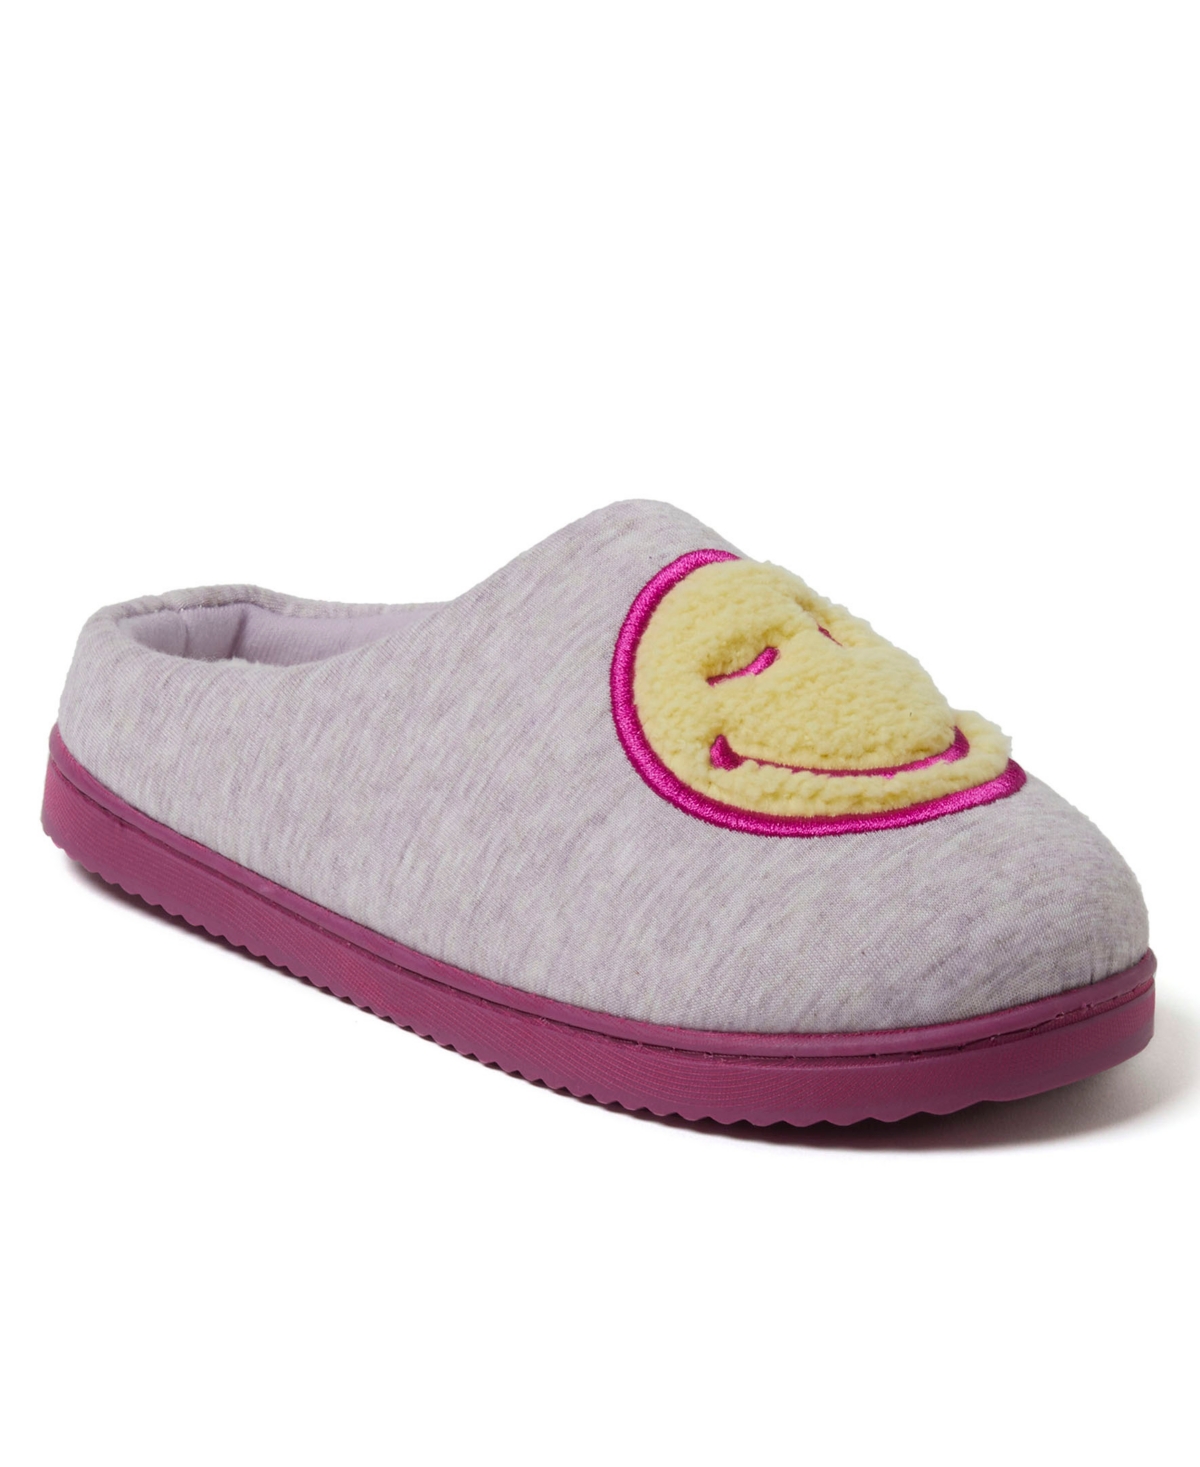 Women's Smile Icon Slippers - Oatmeal Heather